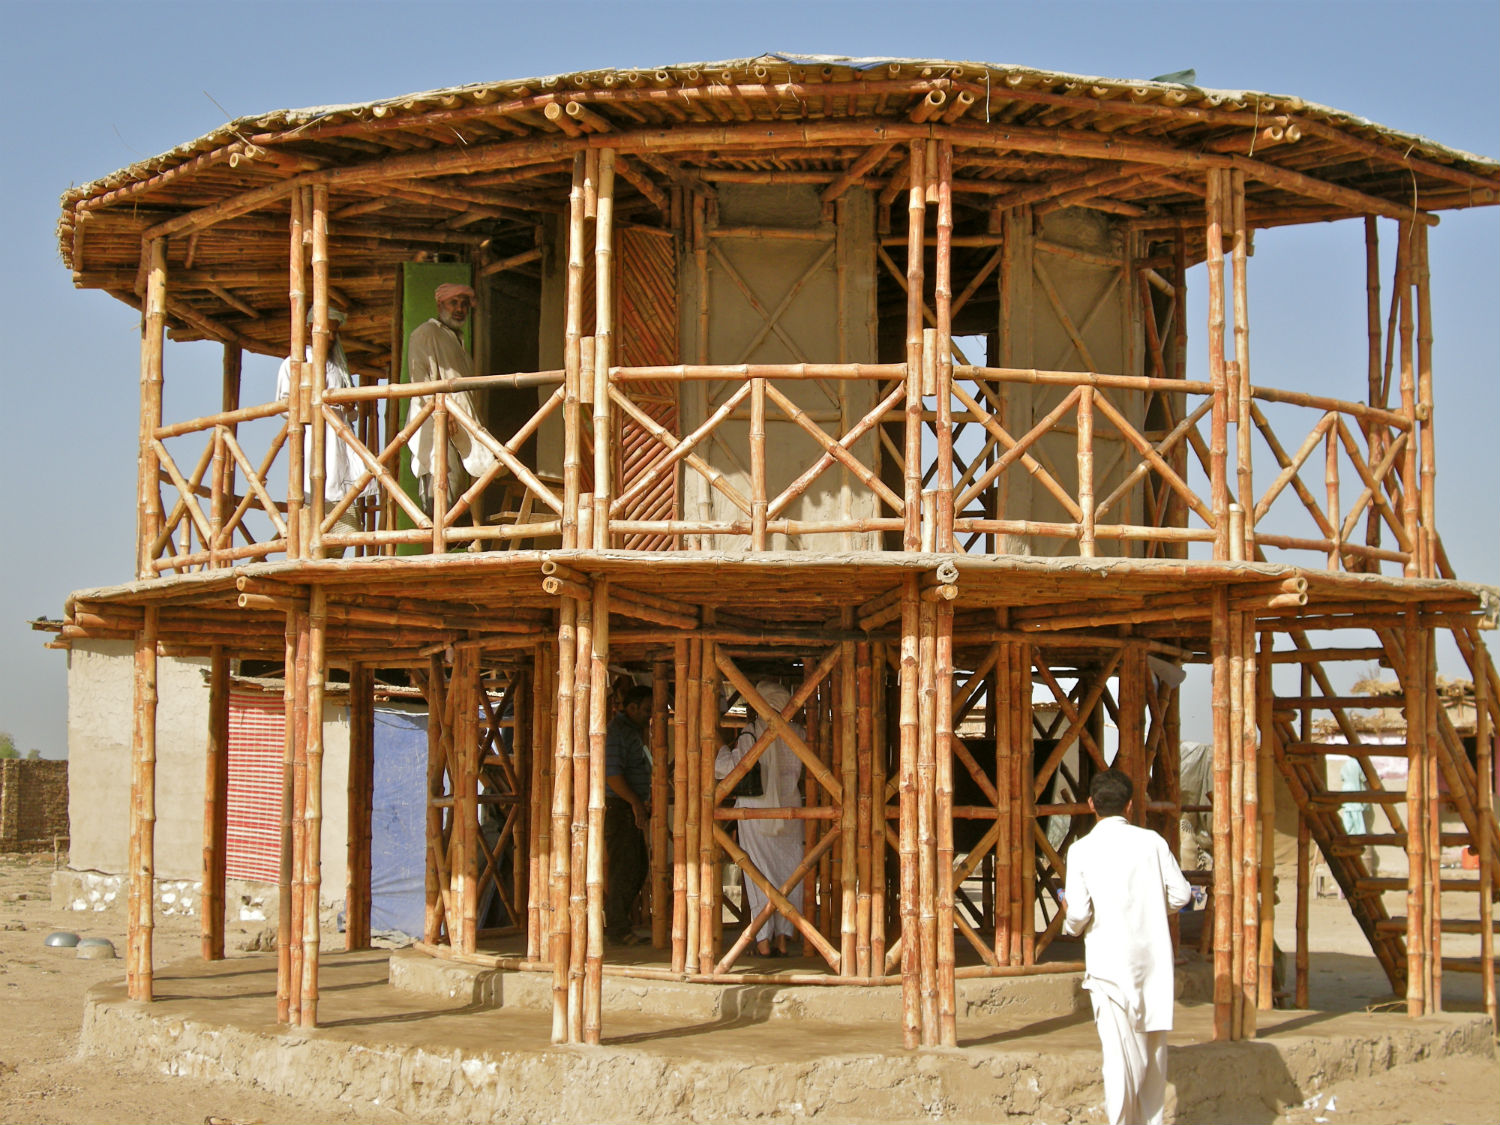 Pakistan is prone to earthquakes and floods. Pakistani architect Yasmeen Lari uses traditional building techniques, bamboo cross-bracing and local materials to create flood- and earthquake-resistant buildings such as this women’s shelter. She also involves local people in reconstruction
